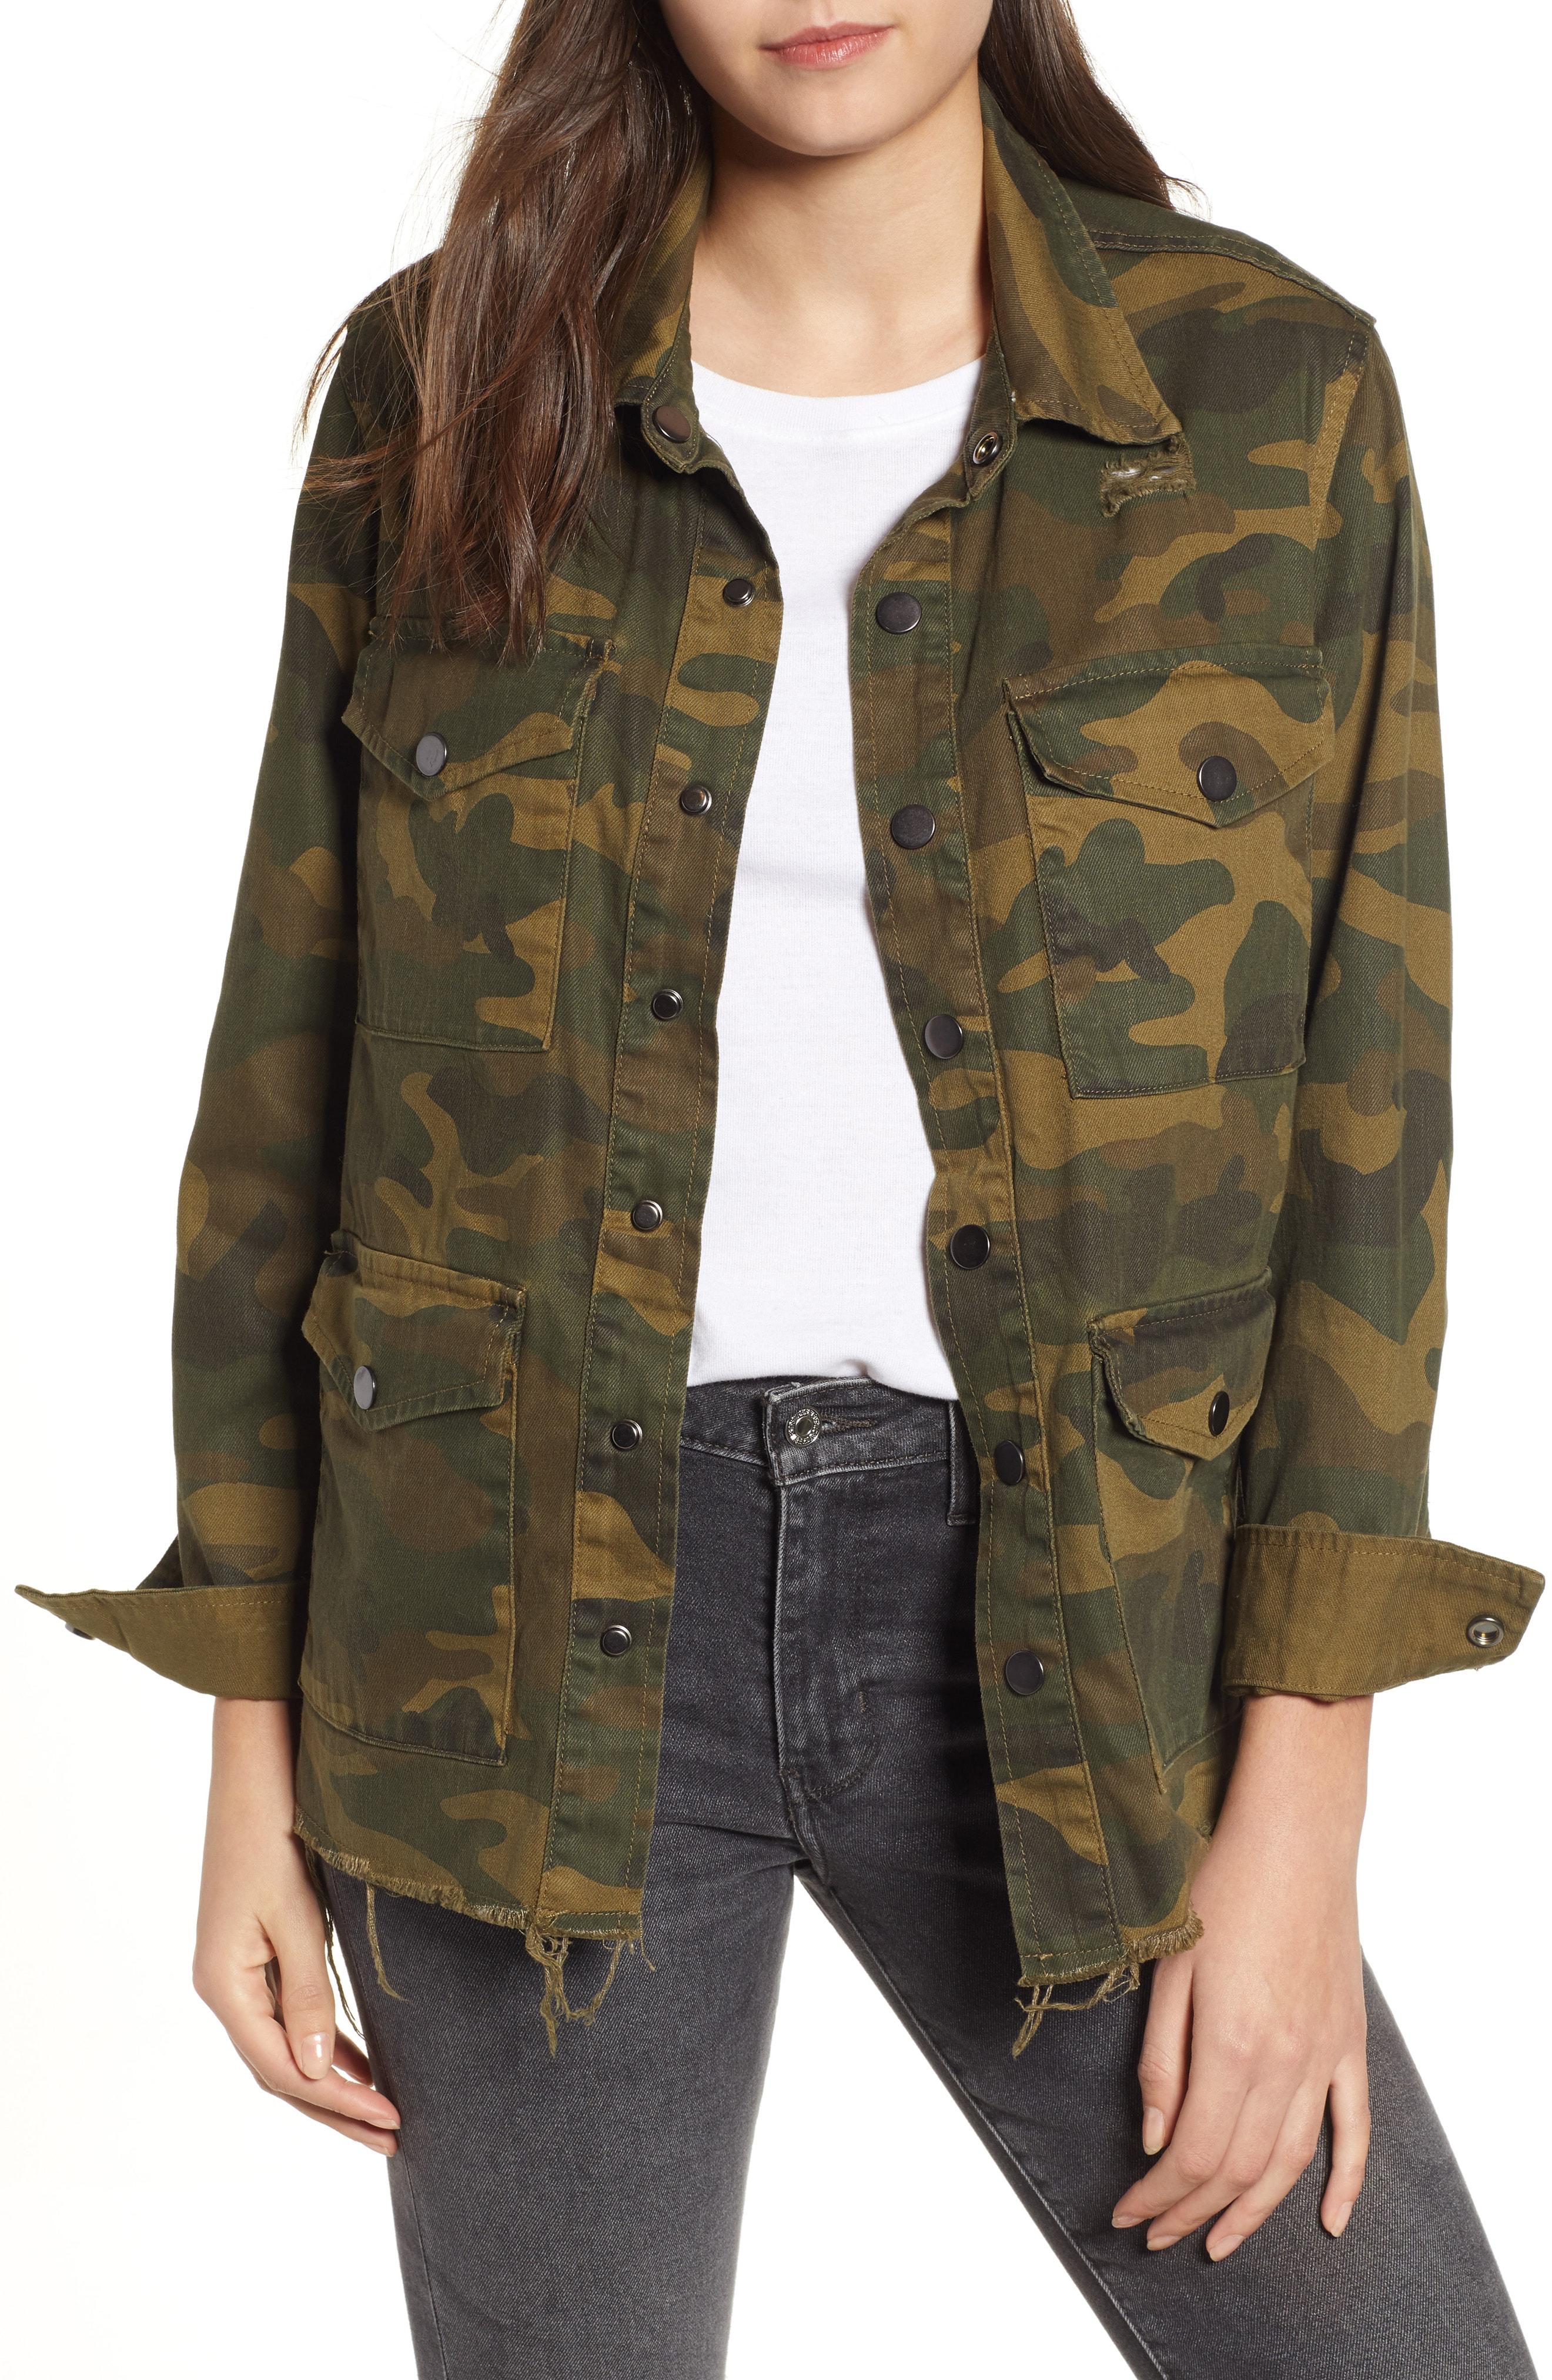 Lyst - Blank NYC Reversible Camouflage Denim Jacket in Green